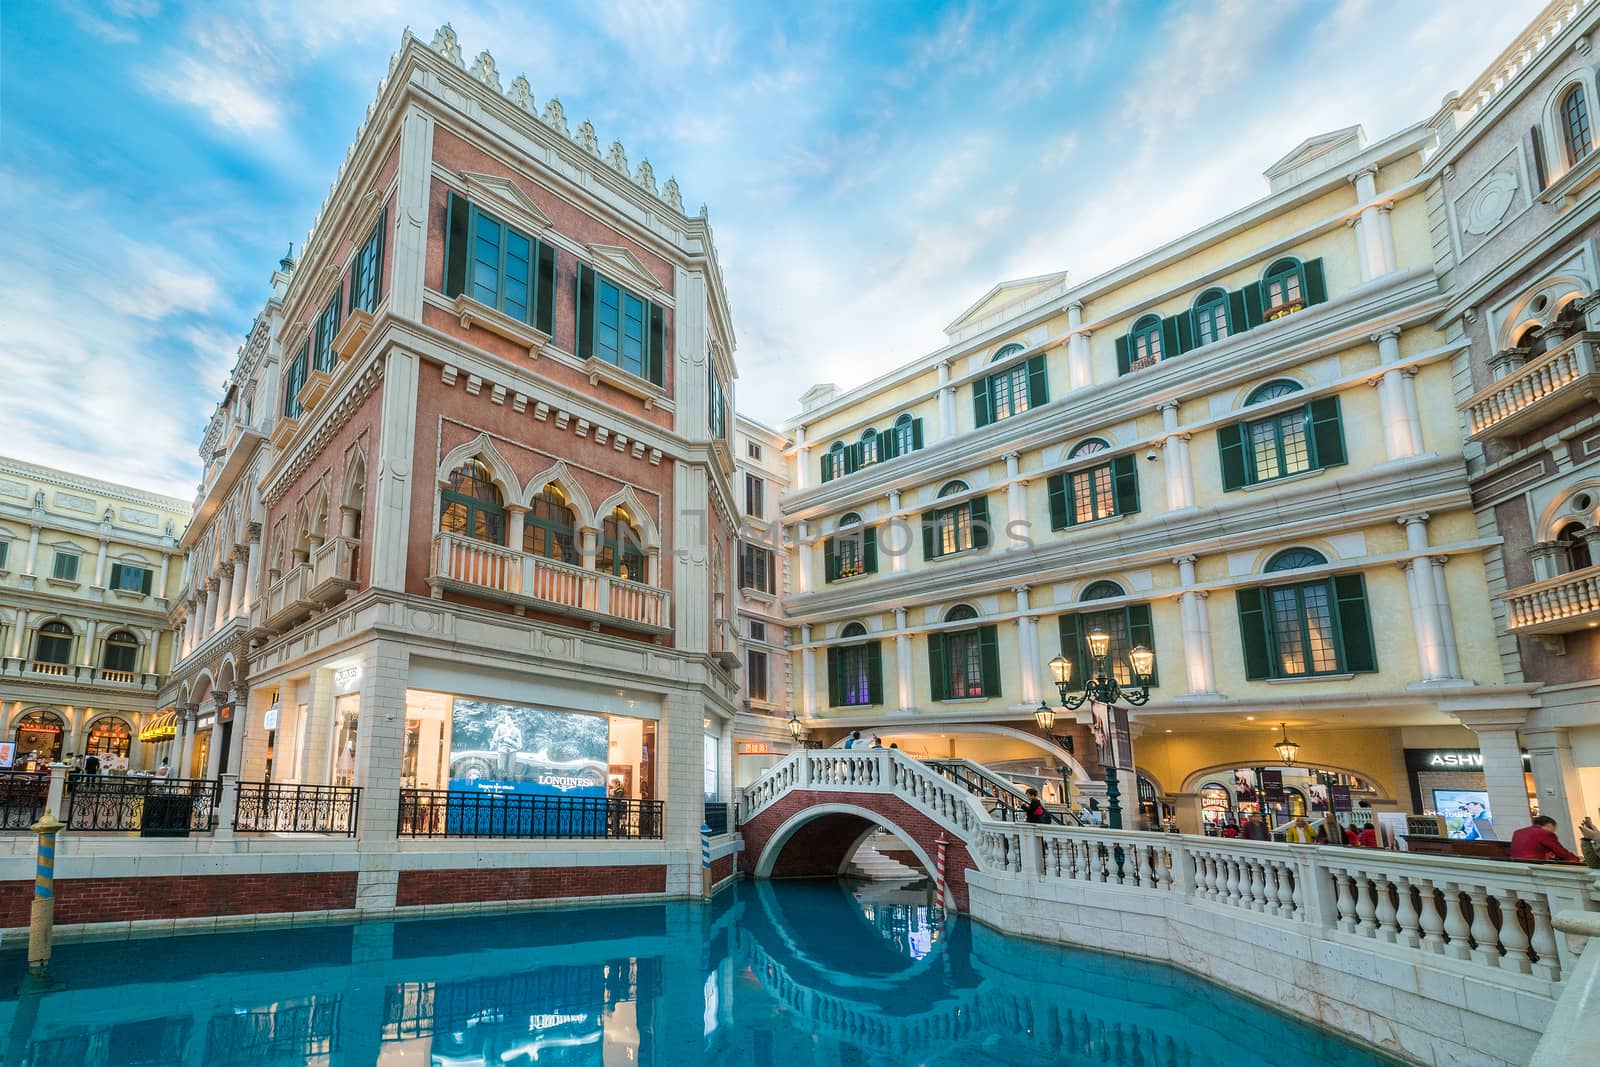 MACAU CHINA-JANUARY 11 visitor on gondola boat in Venetian Hotel The famous shopping mall luxury hotel landmark and the largest casino in the world on January 11,2016 in Macau China